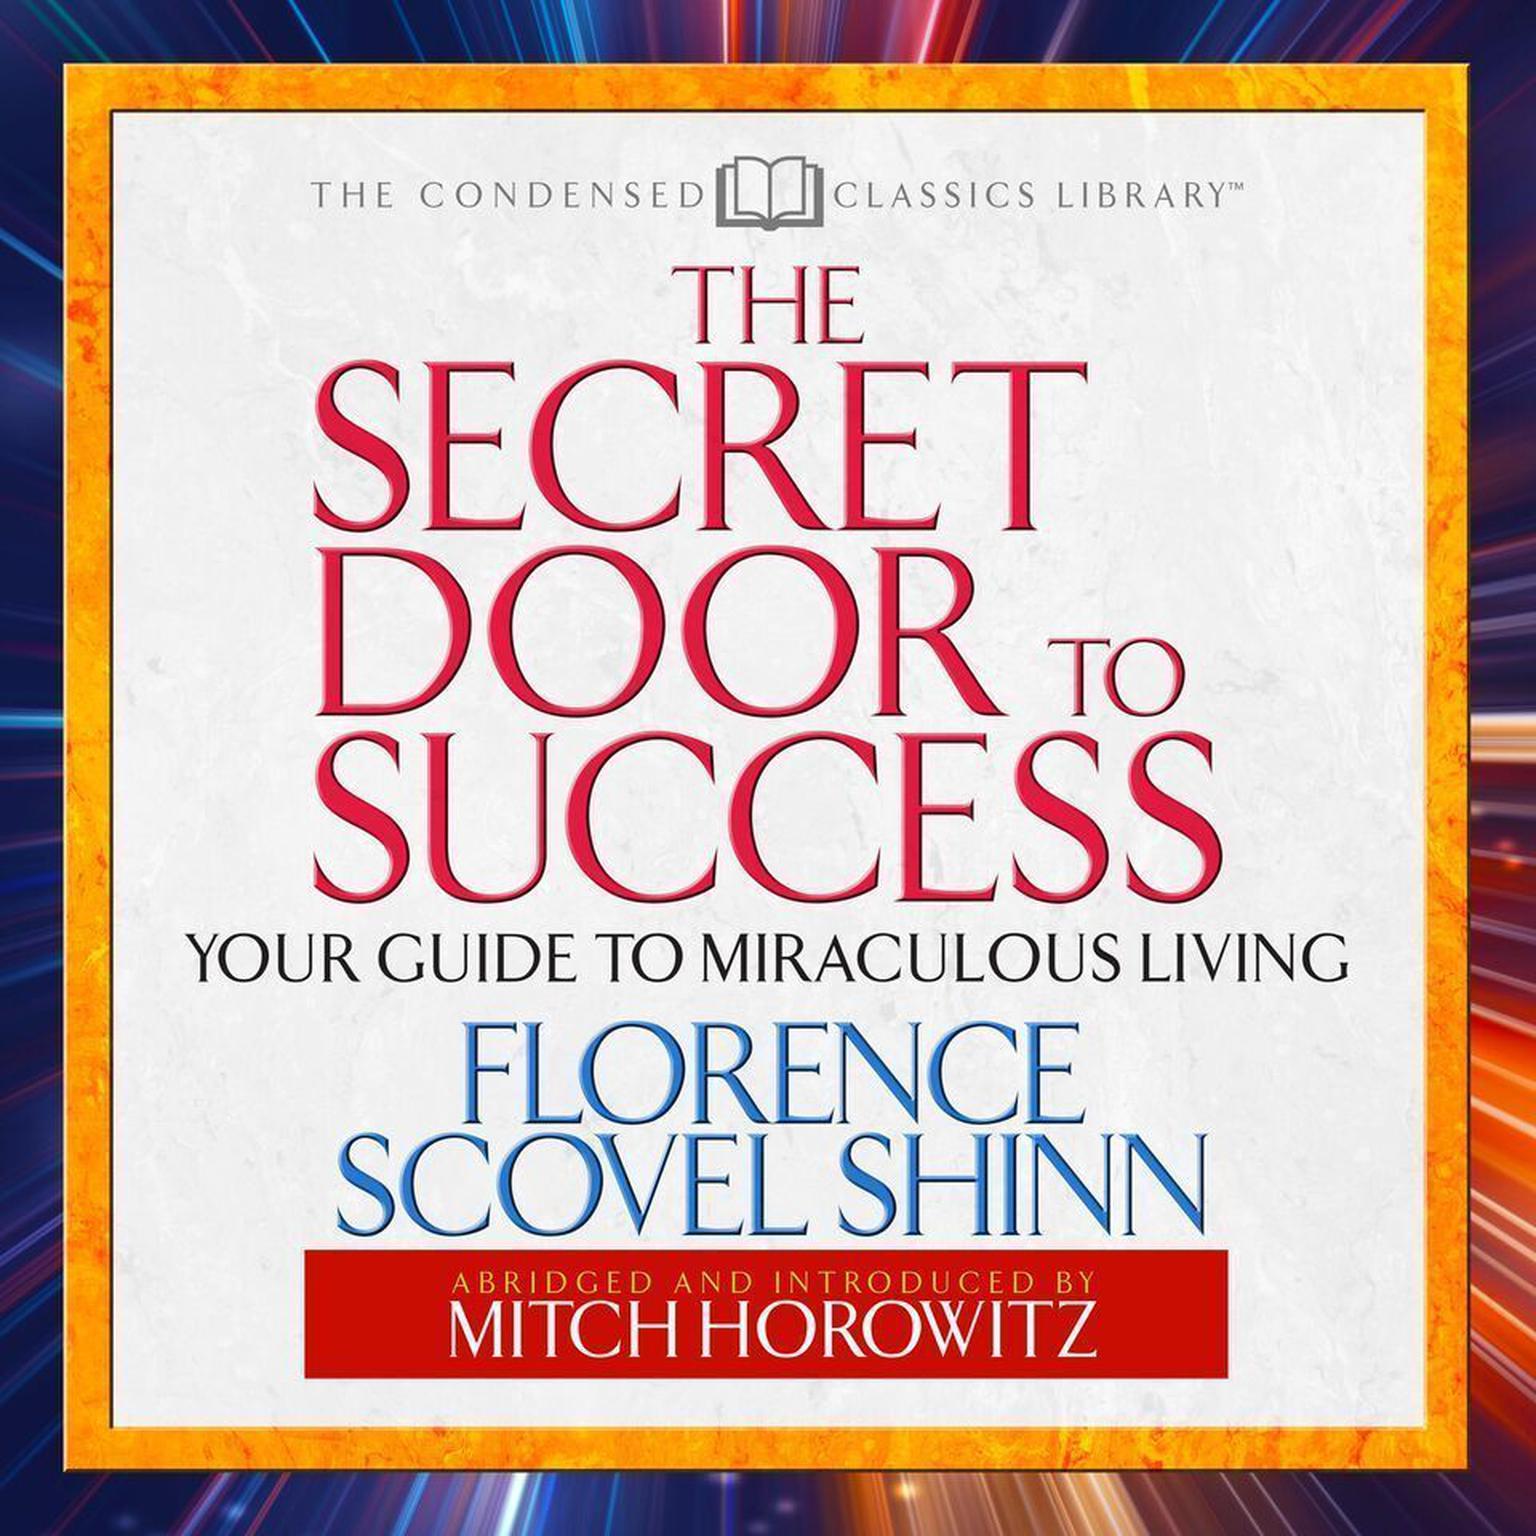 The Secret Door to Success (Abridged): Your Guide to Miraculous Living Audiobook, by Florence Scovel Shinn